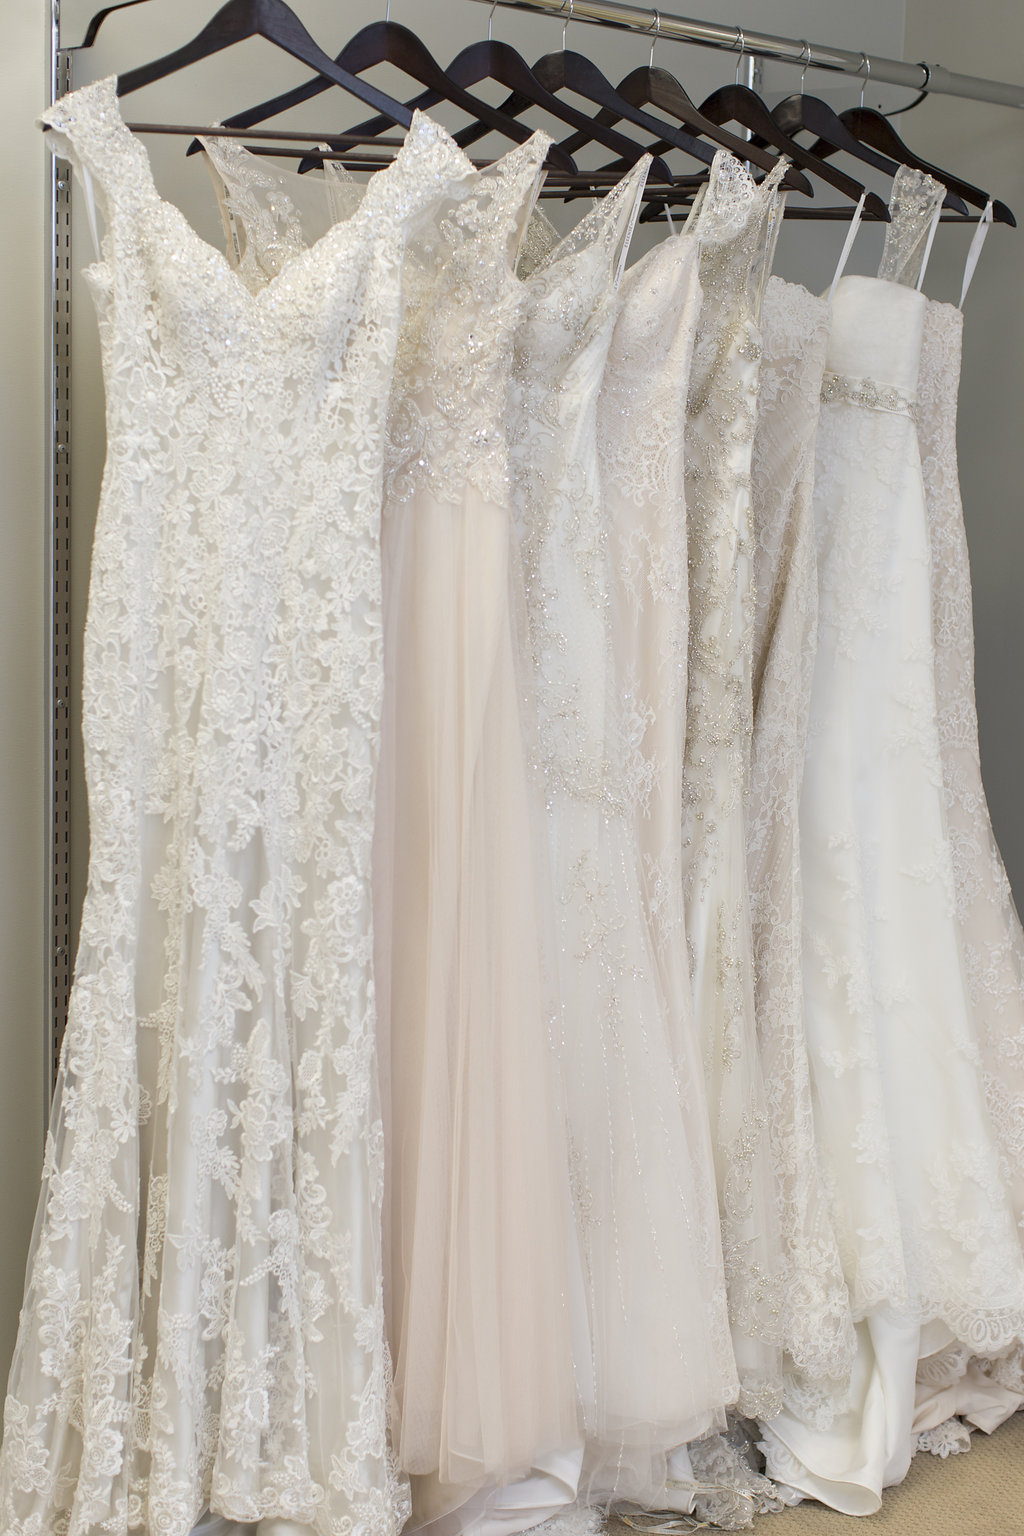 Laurie_Brotherton_Charme_Bridal_and_Prom_Boutique_024.jpg